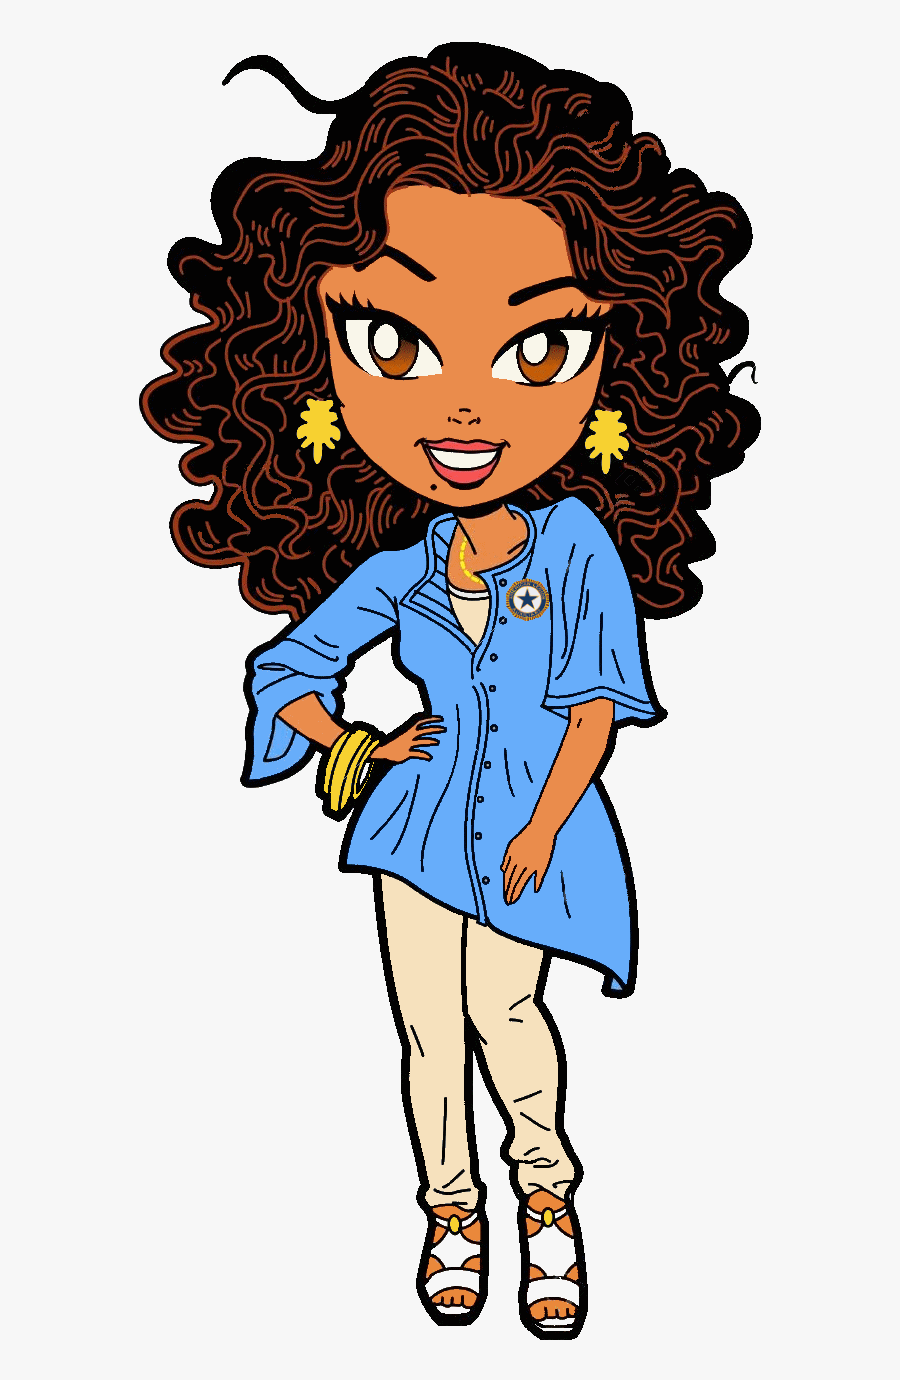 Transparent African American Girl Clipart - African American Lady Cartoon, Transparent Clipart